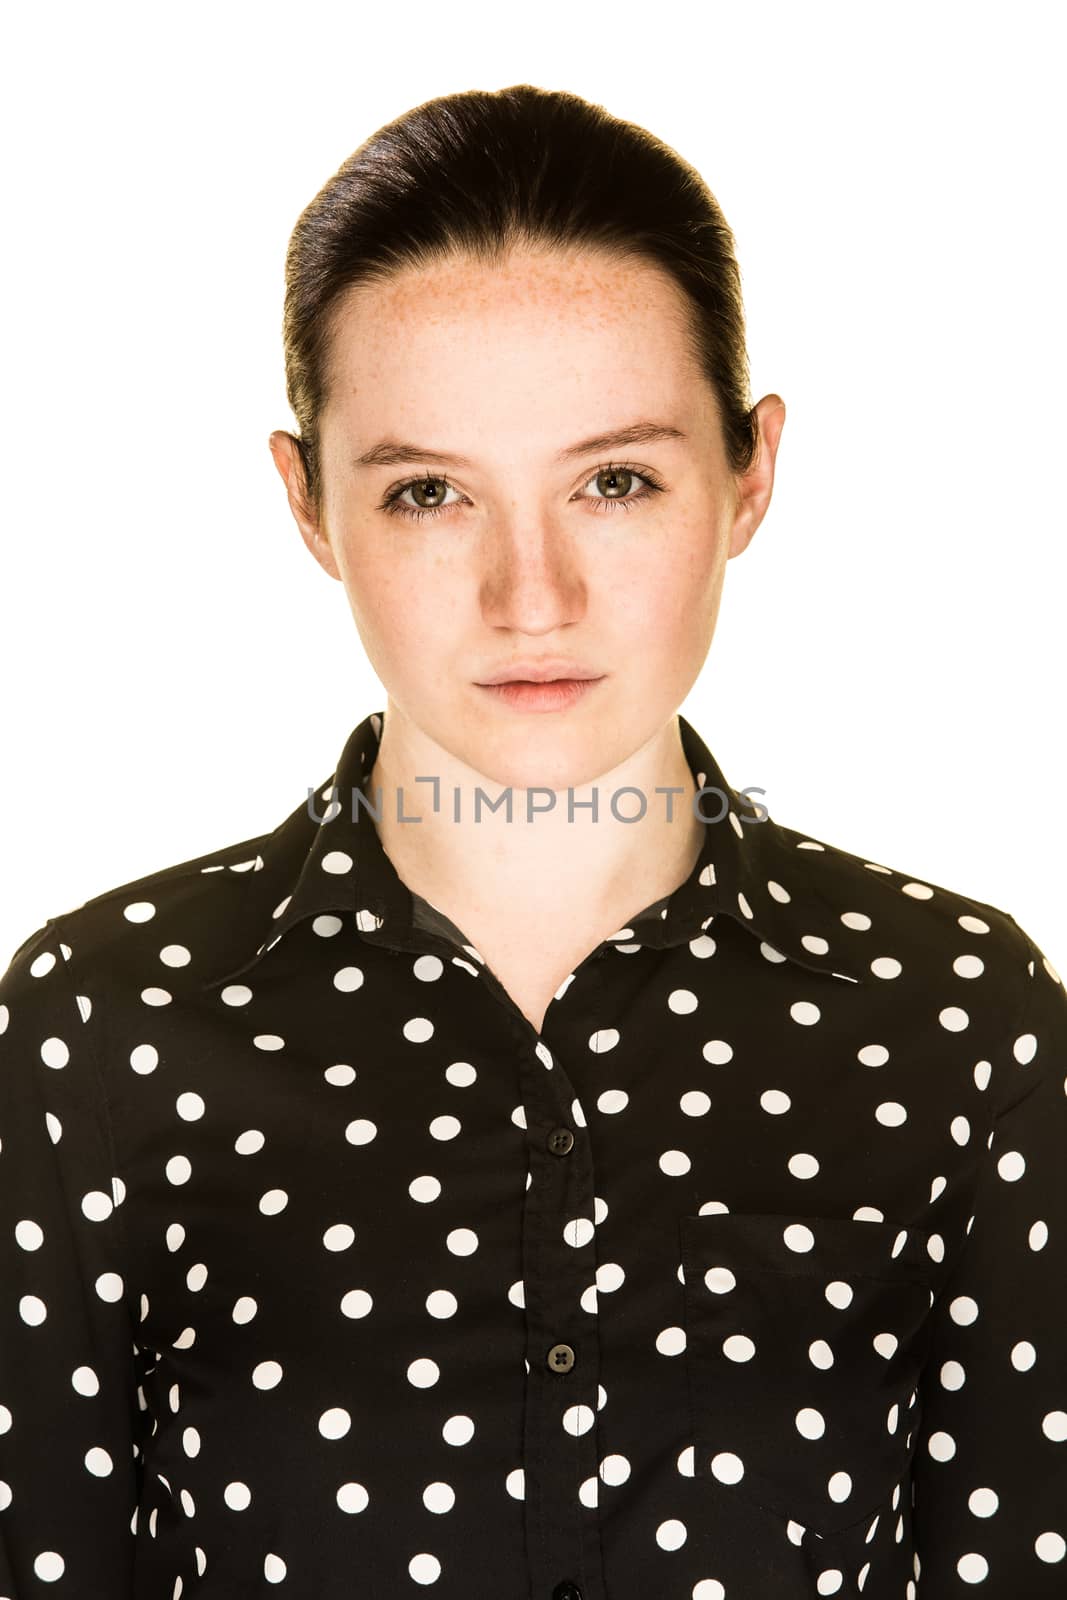 An irritated young girl on a white background